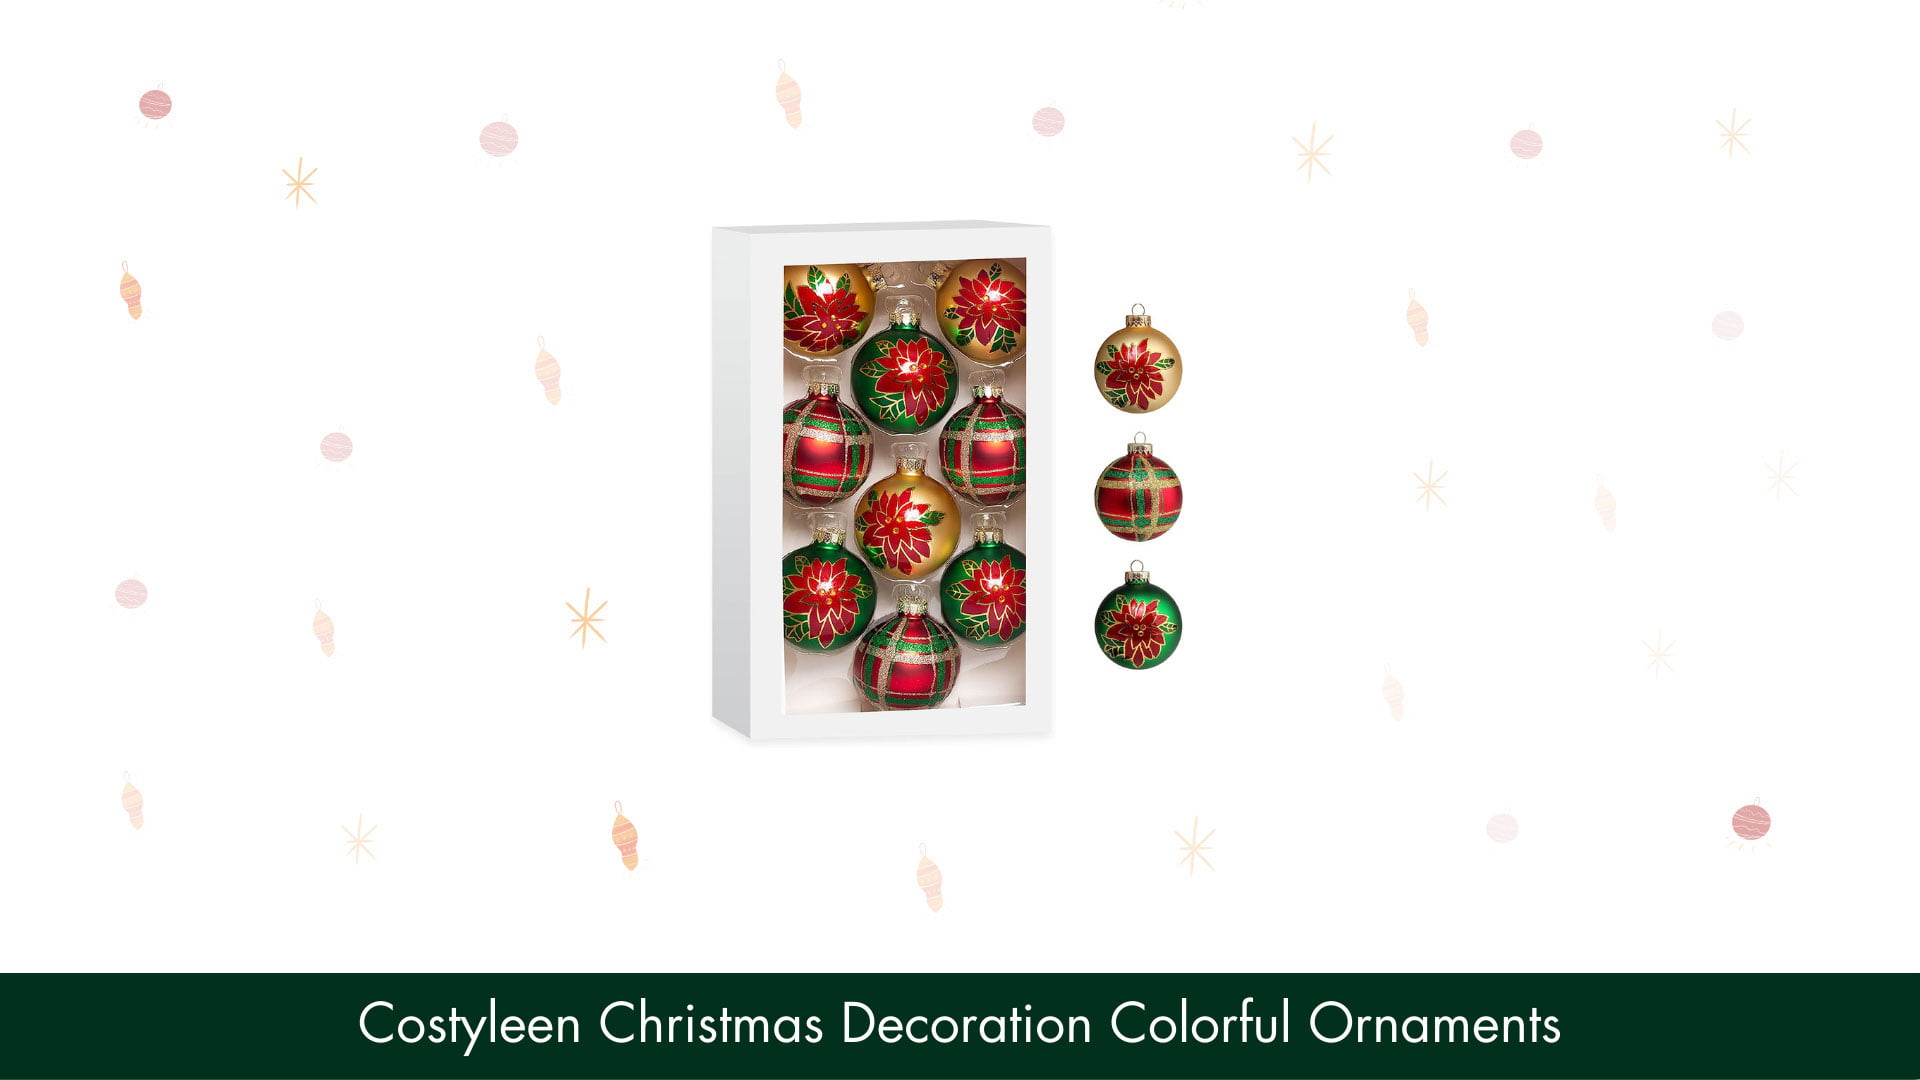 Costyleen Christmas Decoration Colorful Ornaments